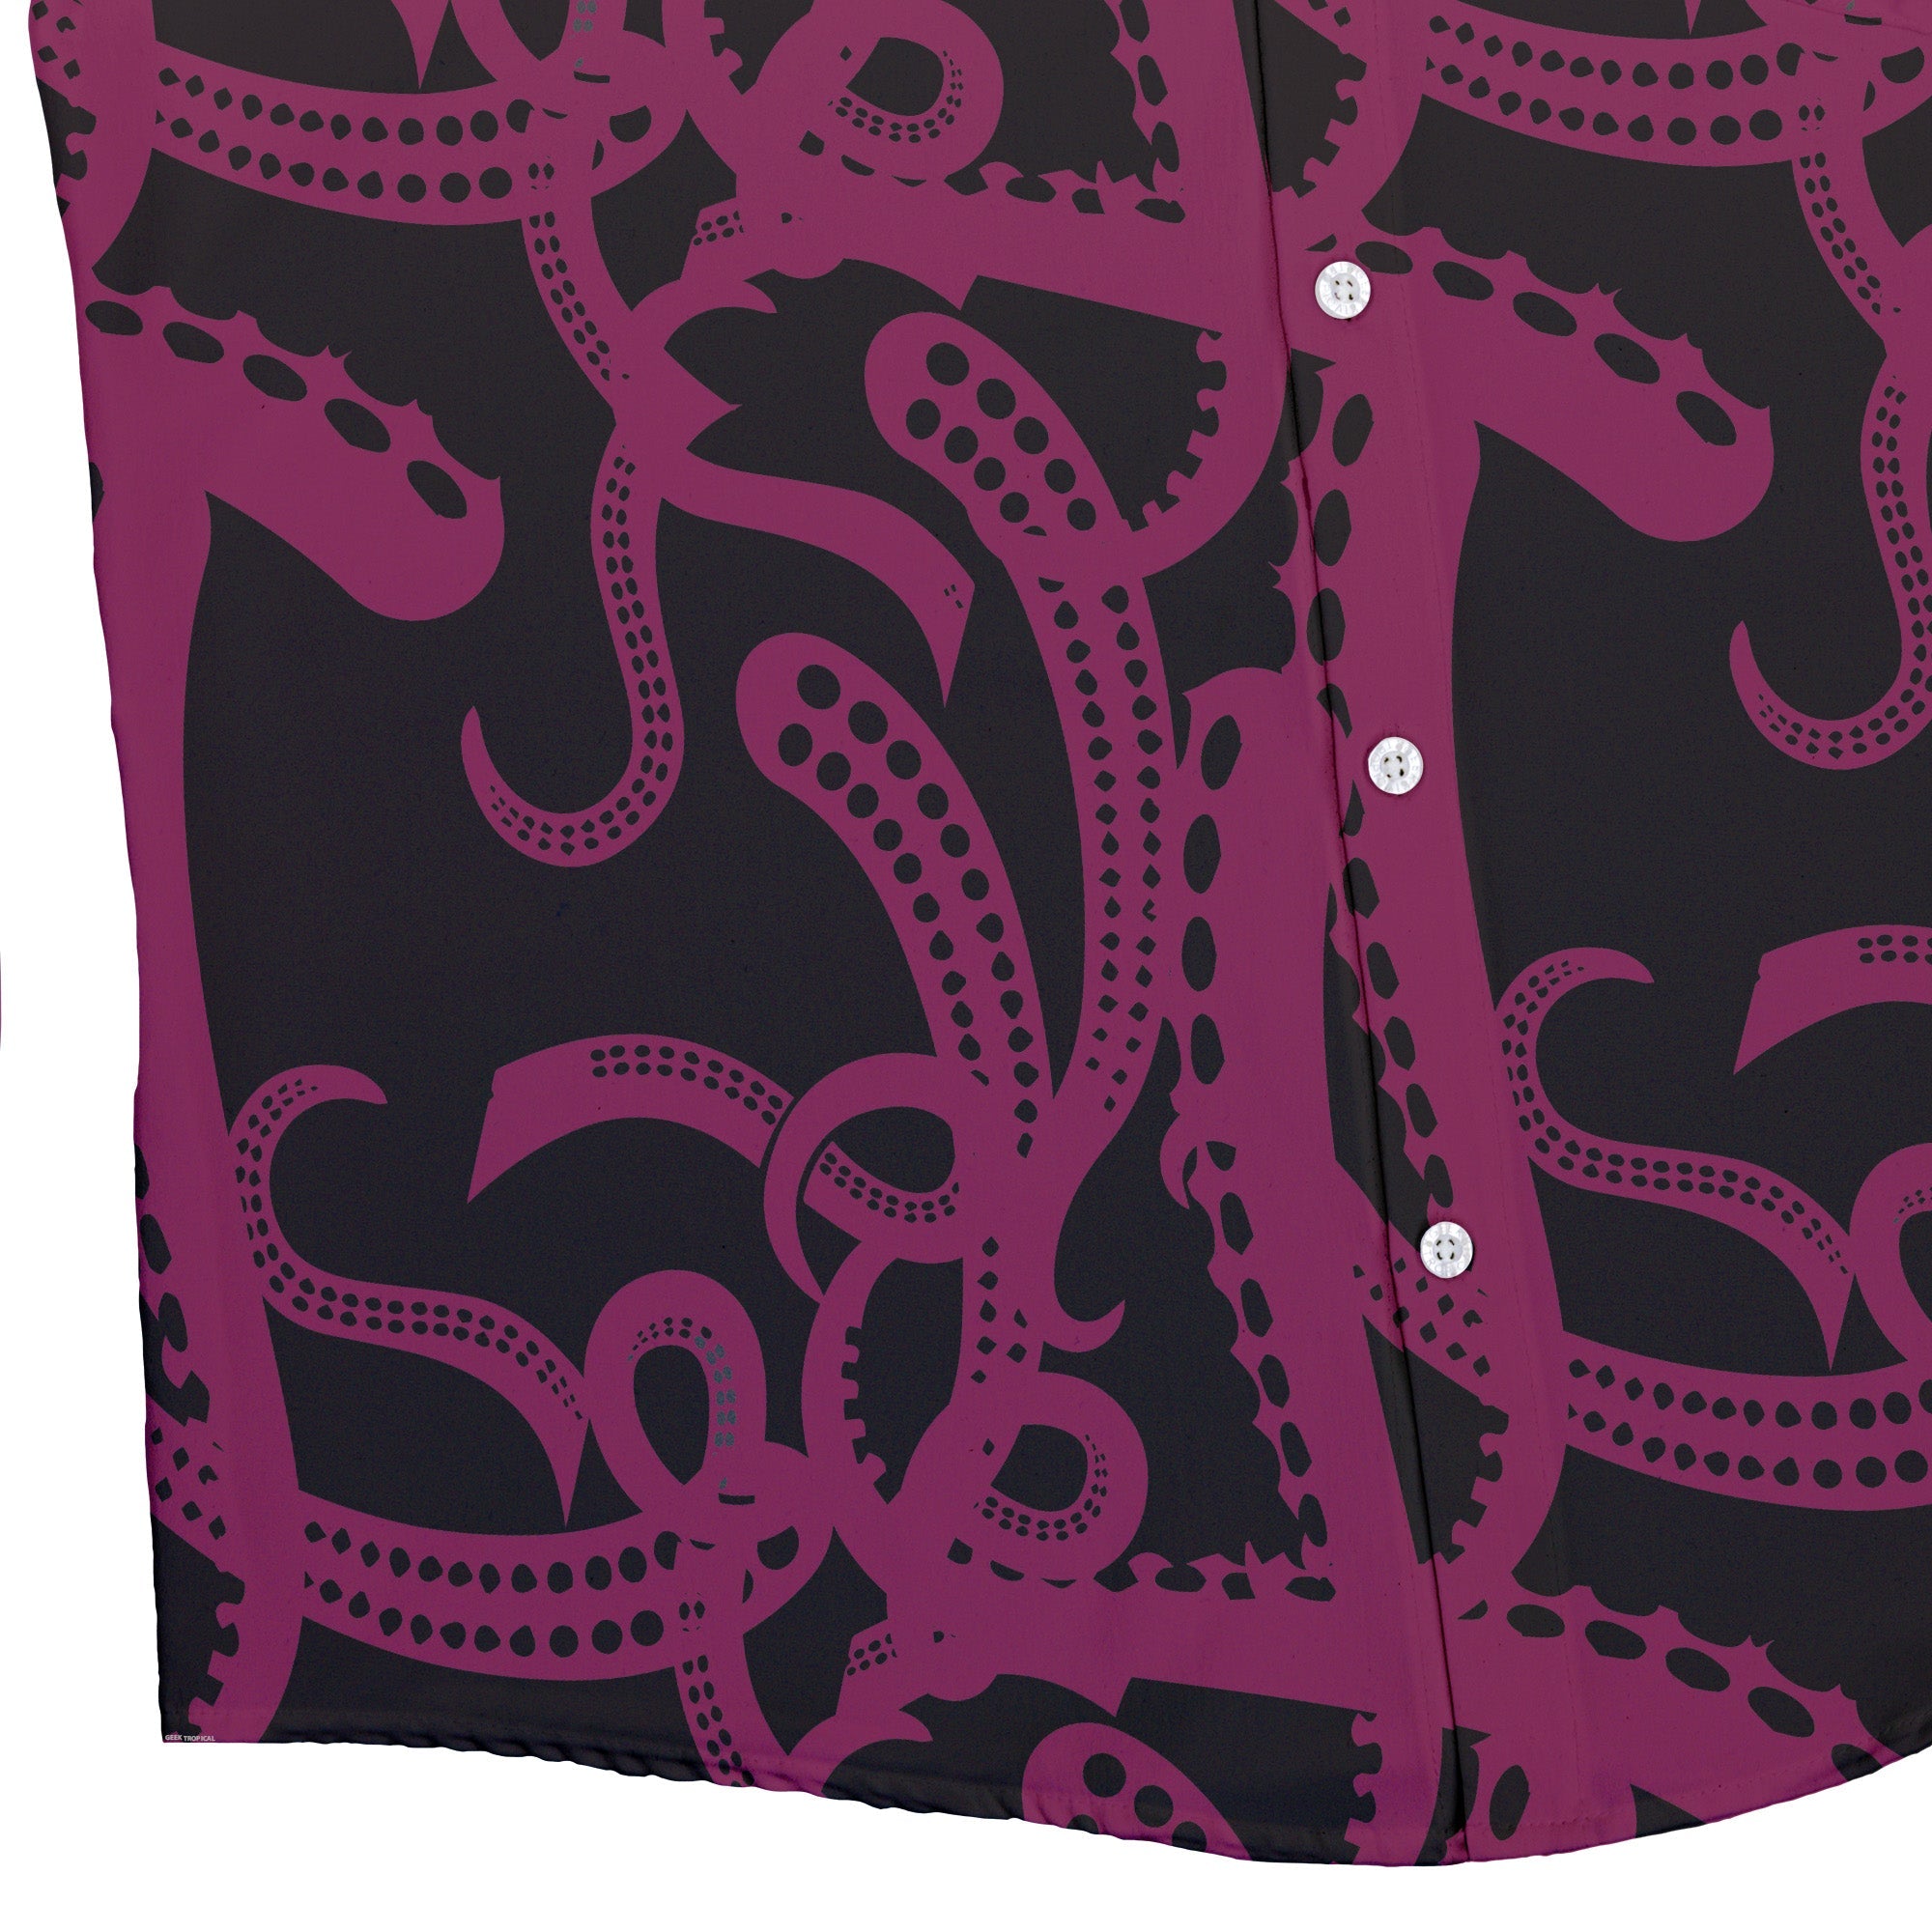 Tentacles of Cthulhu Button Up Shirt